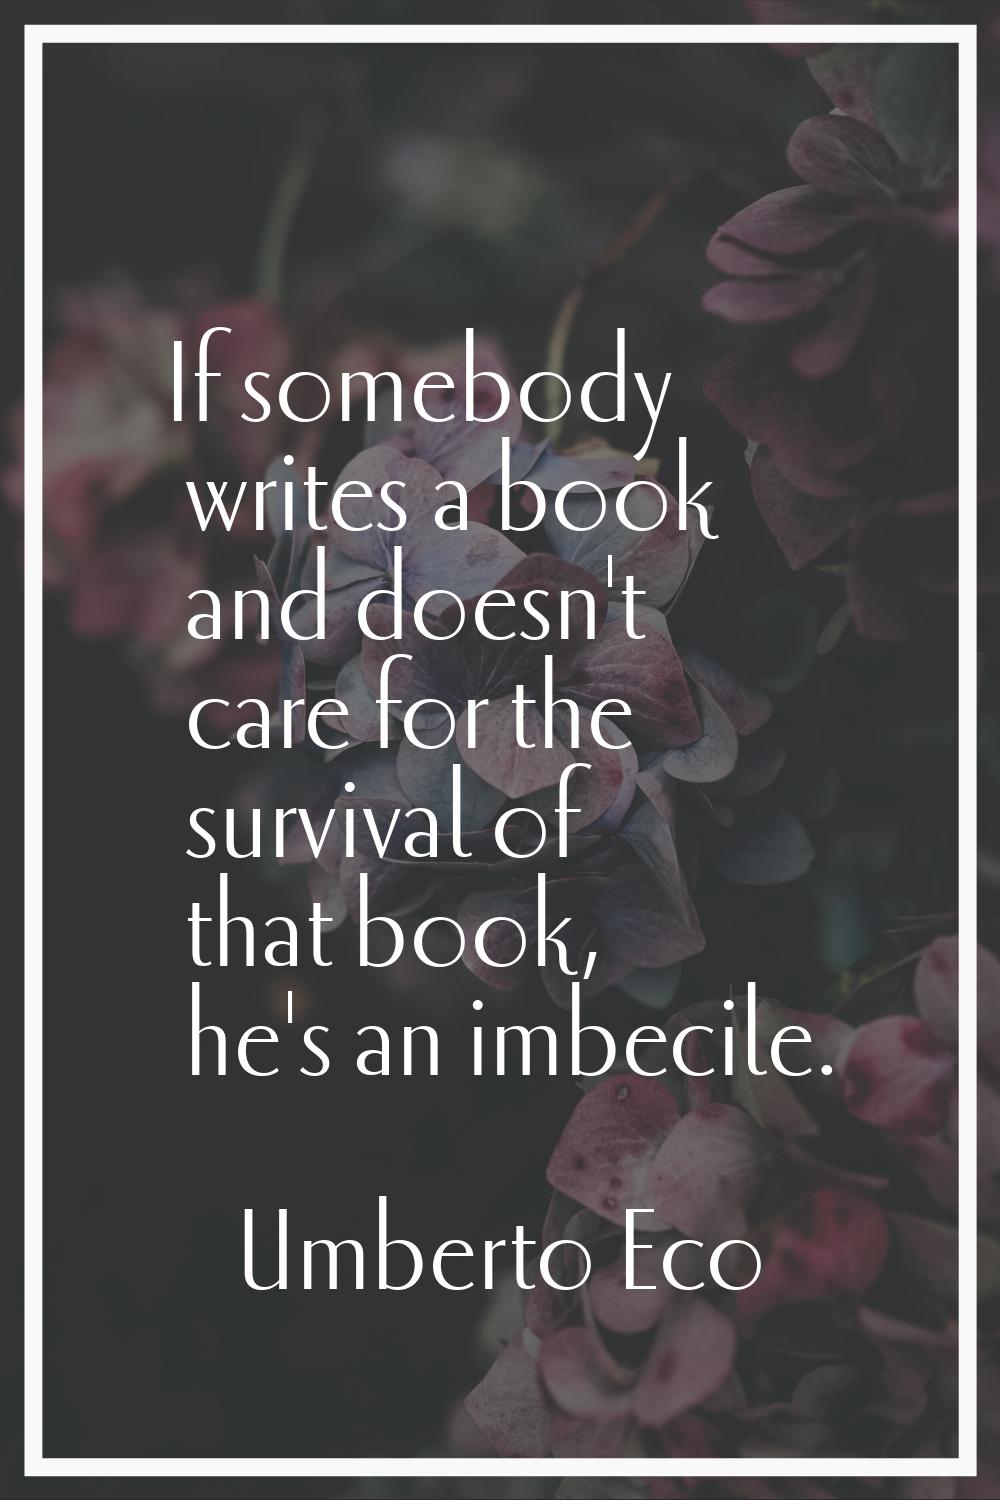 If somebody writes a book and doesn't care for the survival of that book, he's an imbecile.